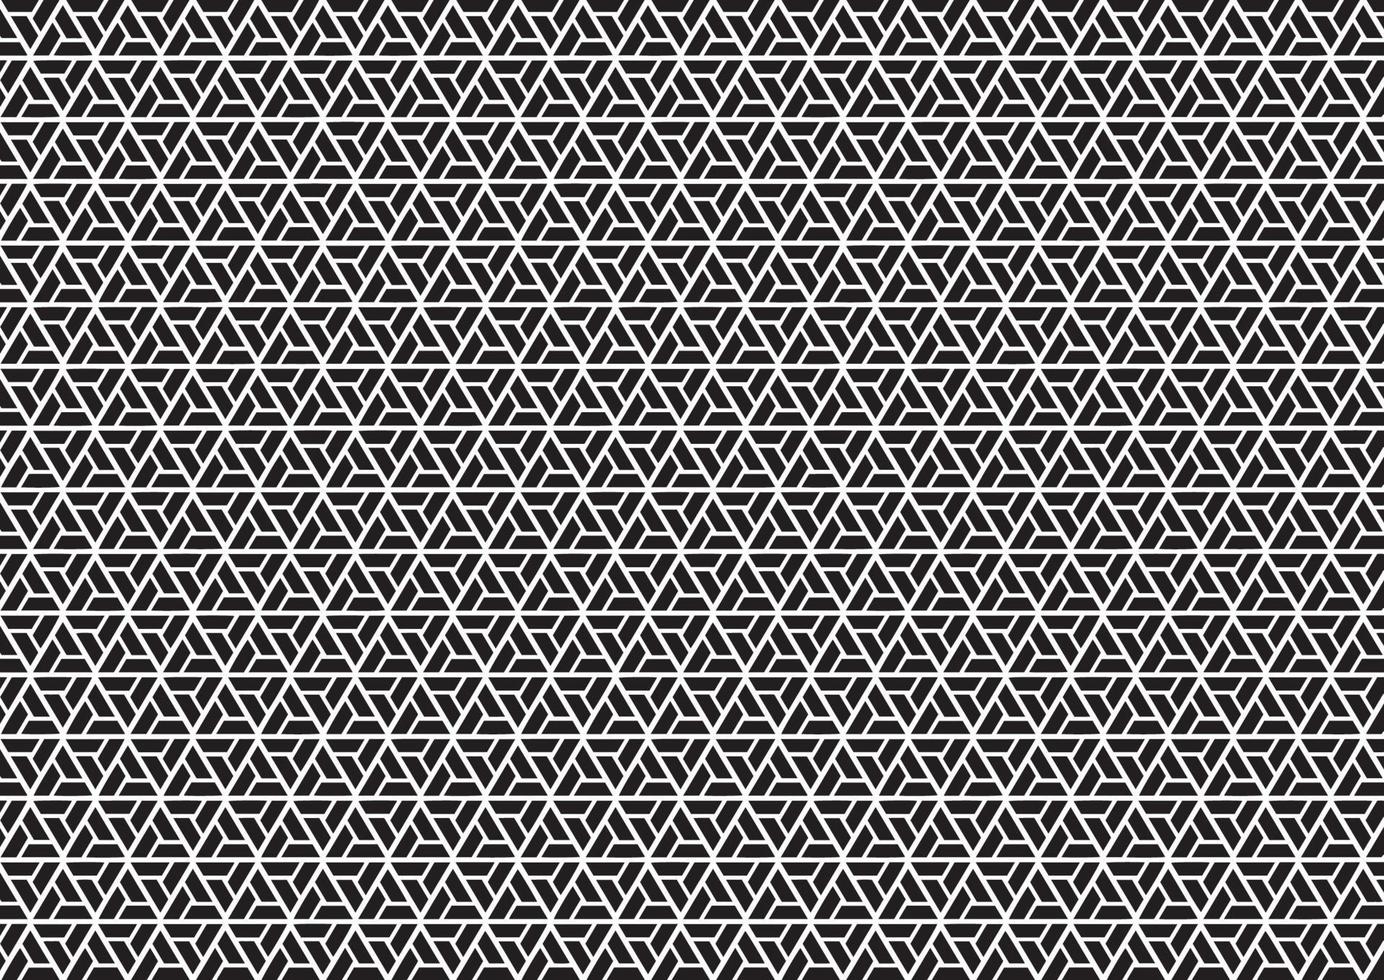 Geometric pattern design background in black and white vector